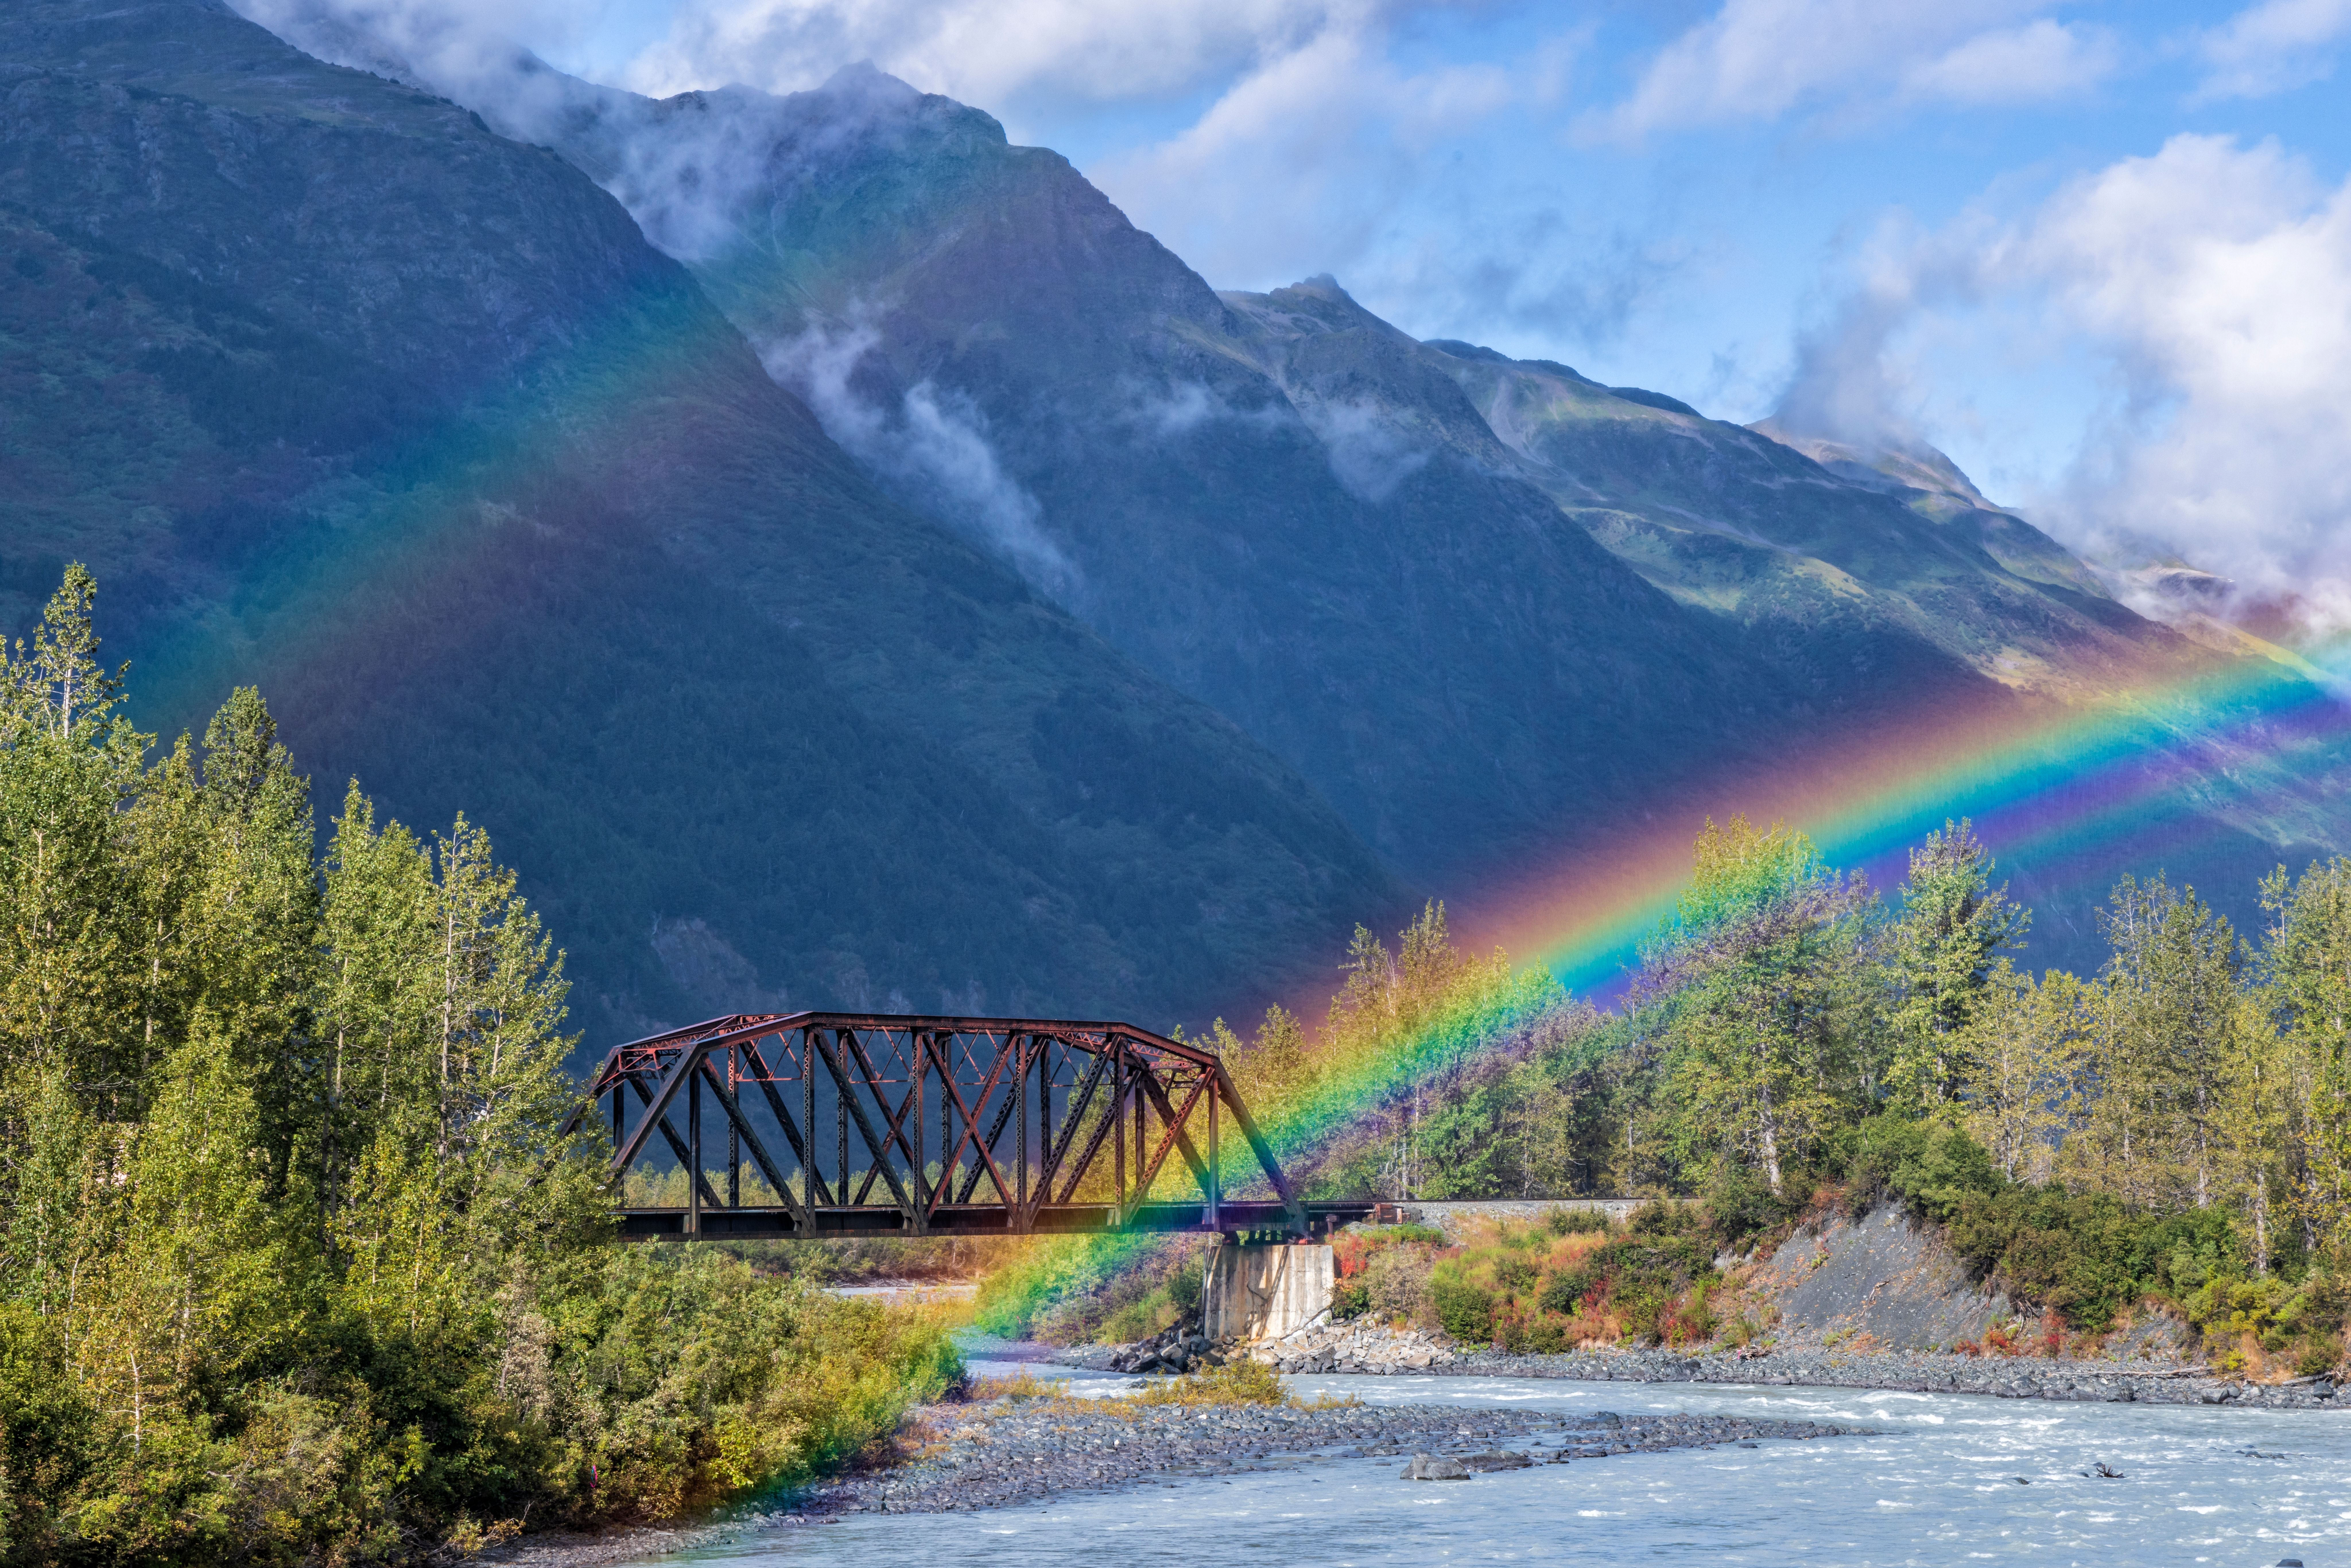 Rainbow over a scenic river and bridge in Chugach National Forest, Alaska, viewed from a cruise shore excursion.